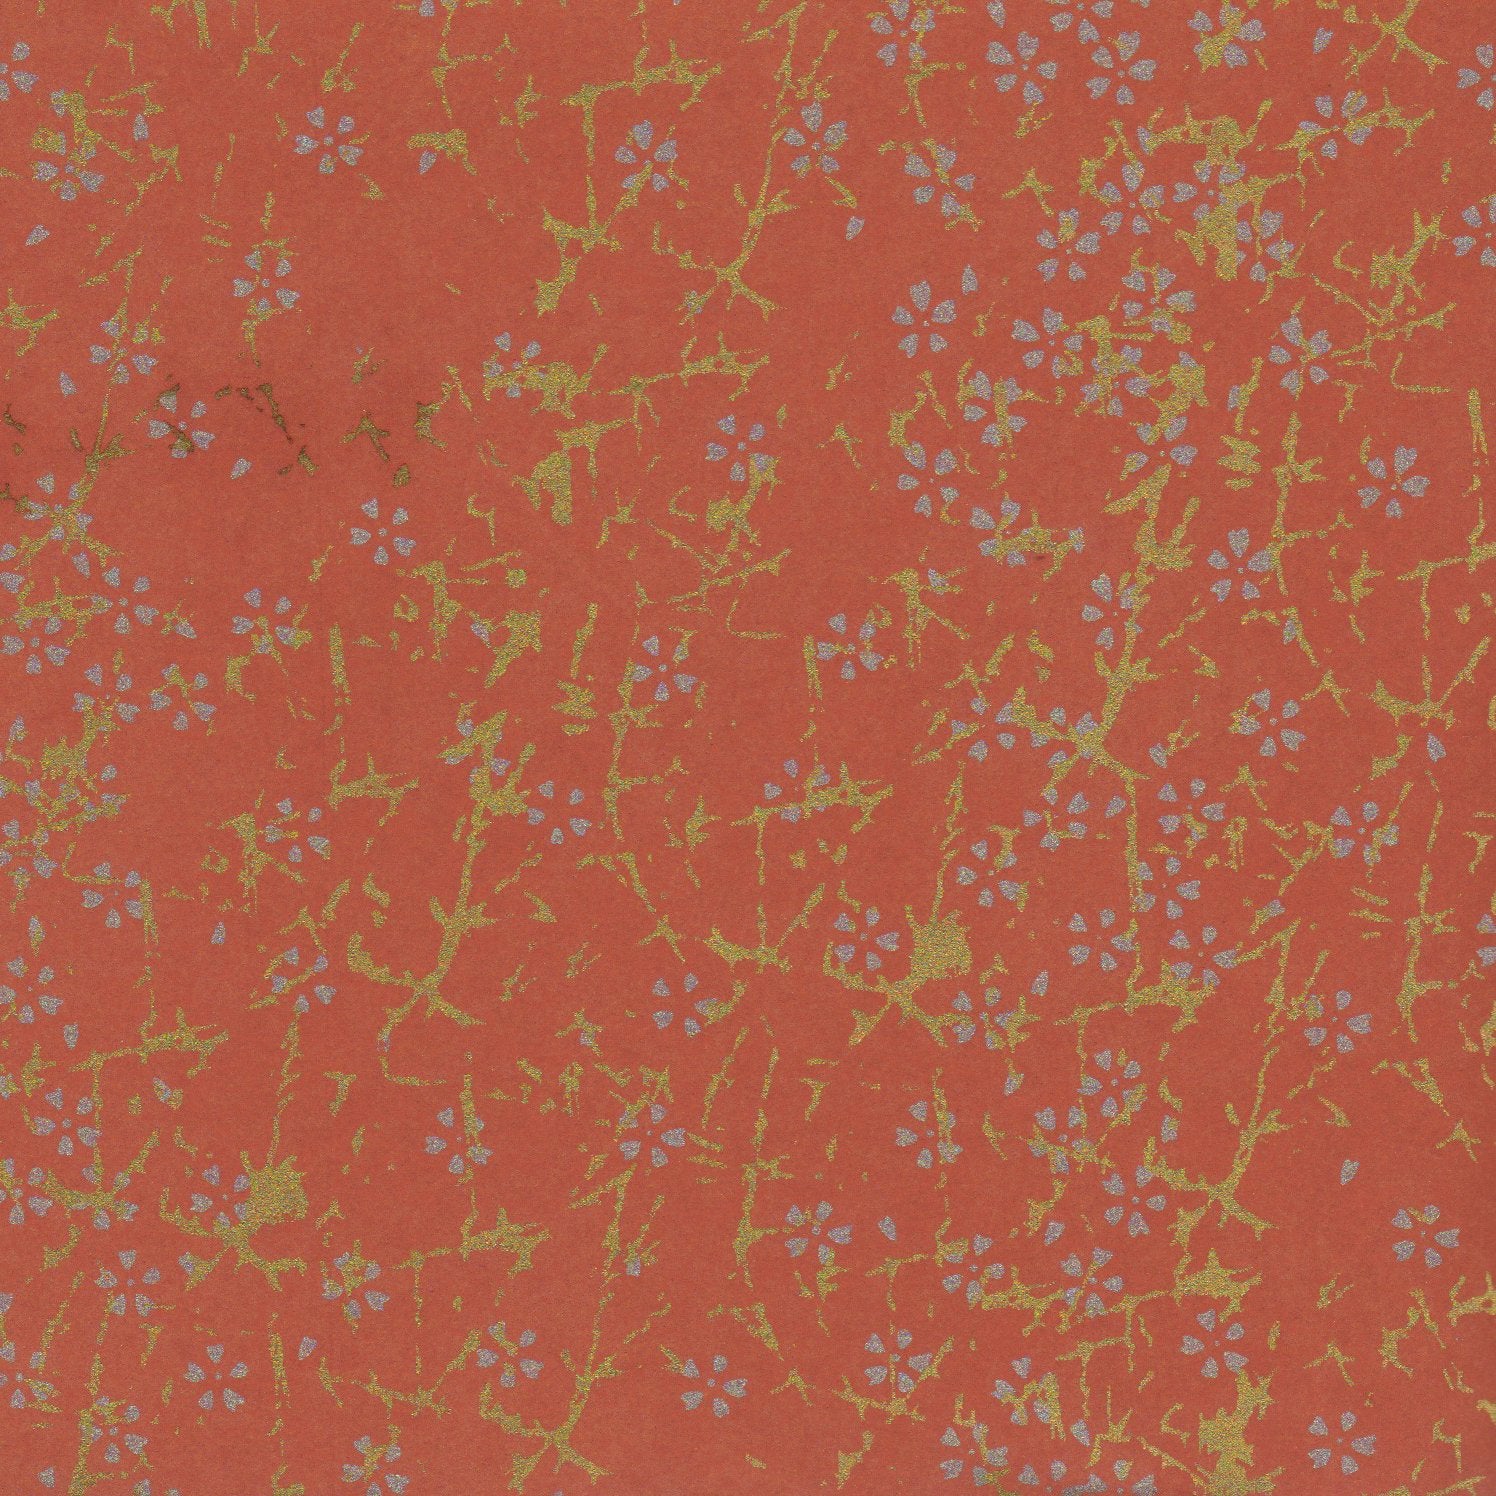 Pack of 20 Sheets 14x14cm Yuzen Washi Origami Paper HZ-184 - Small Silver Cherry Blossom Fire Orange - washi paper - Lavender Home London